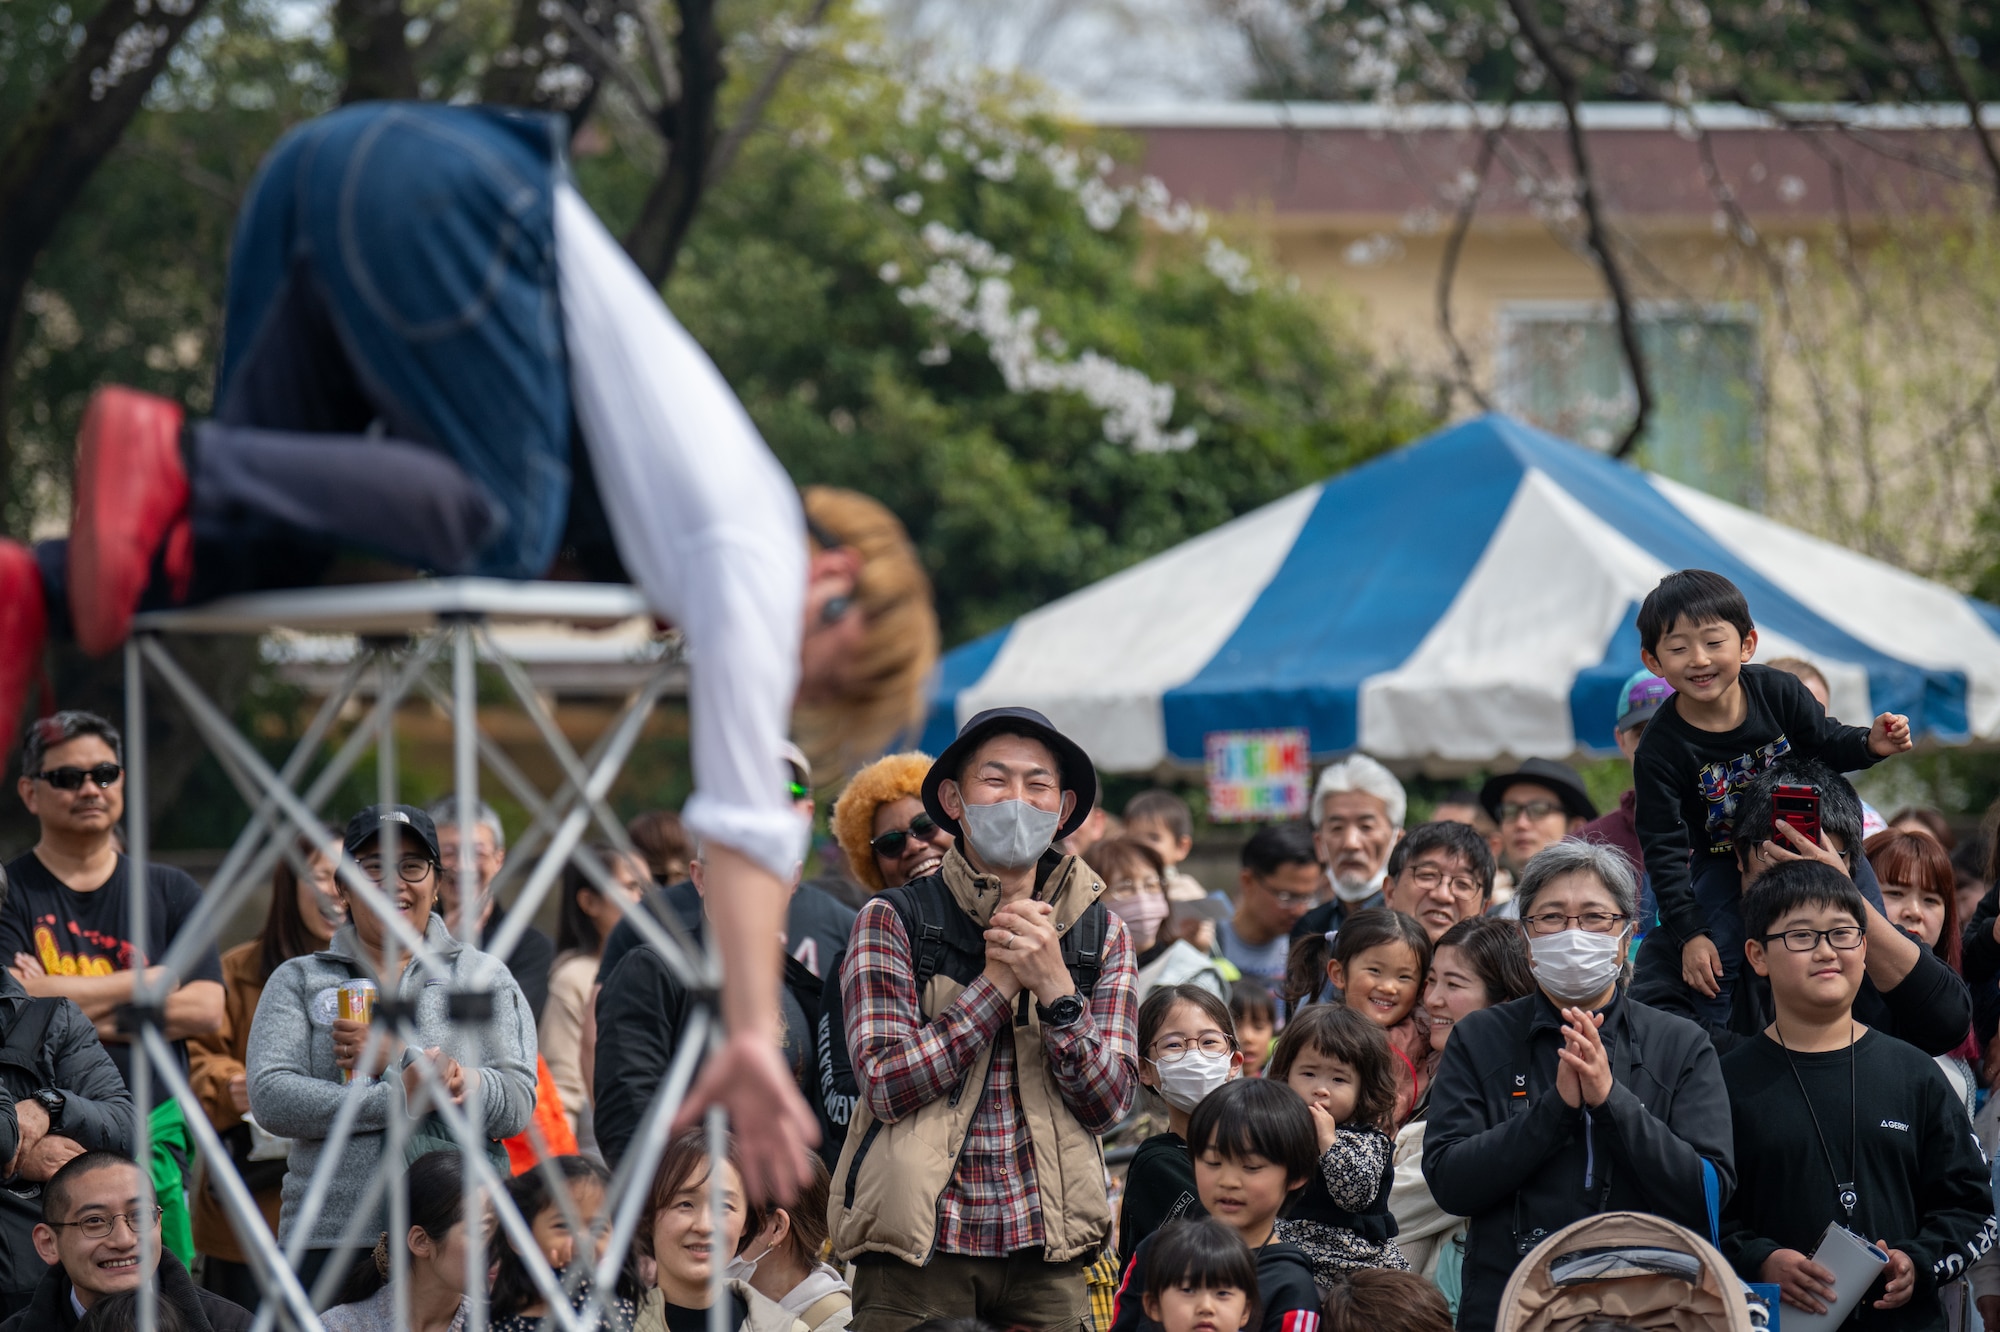 Japanese and Yokota Air Base community members gather for a spring festival.